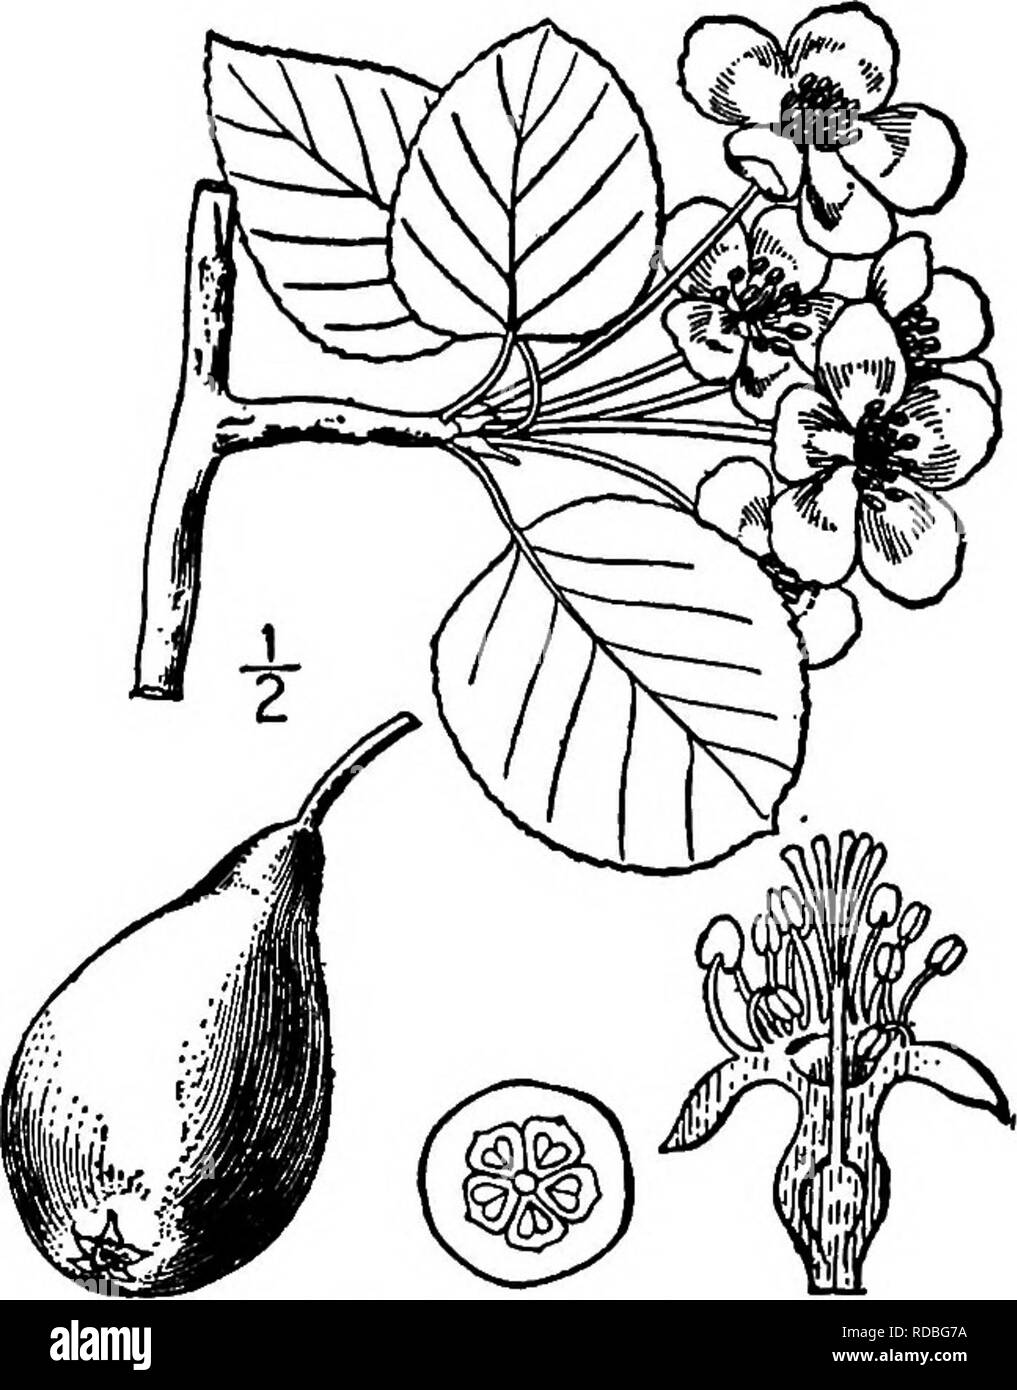 . North American trees : being descriptions and illustrations of the trees growing independently of cultivation in North America, north of Mexico and the West Indies . Trees. Pear 429 II. PEAR GENUS PYRUS [TOURNEFORT] LINNAEUS Species Pyrus communis Linnaeus ?S an inferior fruited escape from orchards, the Pear is found in woods and thickets of the northeastern States. It is a native of Europe and Asia, attaining a maximum height of 20 meters, with a trunk diameter of 9 dm., and is the type of the genus Pyrus. The trunk is straight, its branches are short, stout, and ascending, forming an oblo Stock Photo